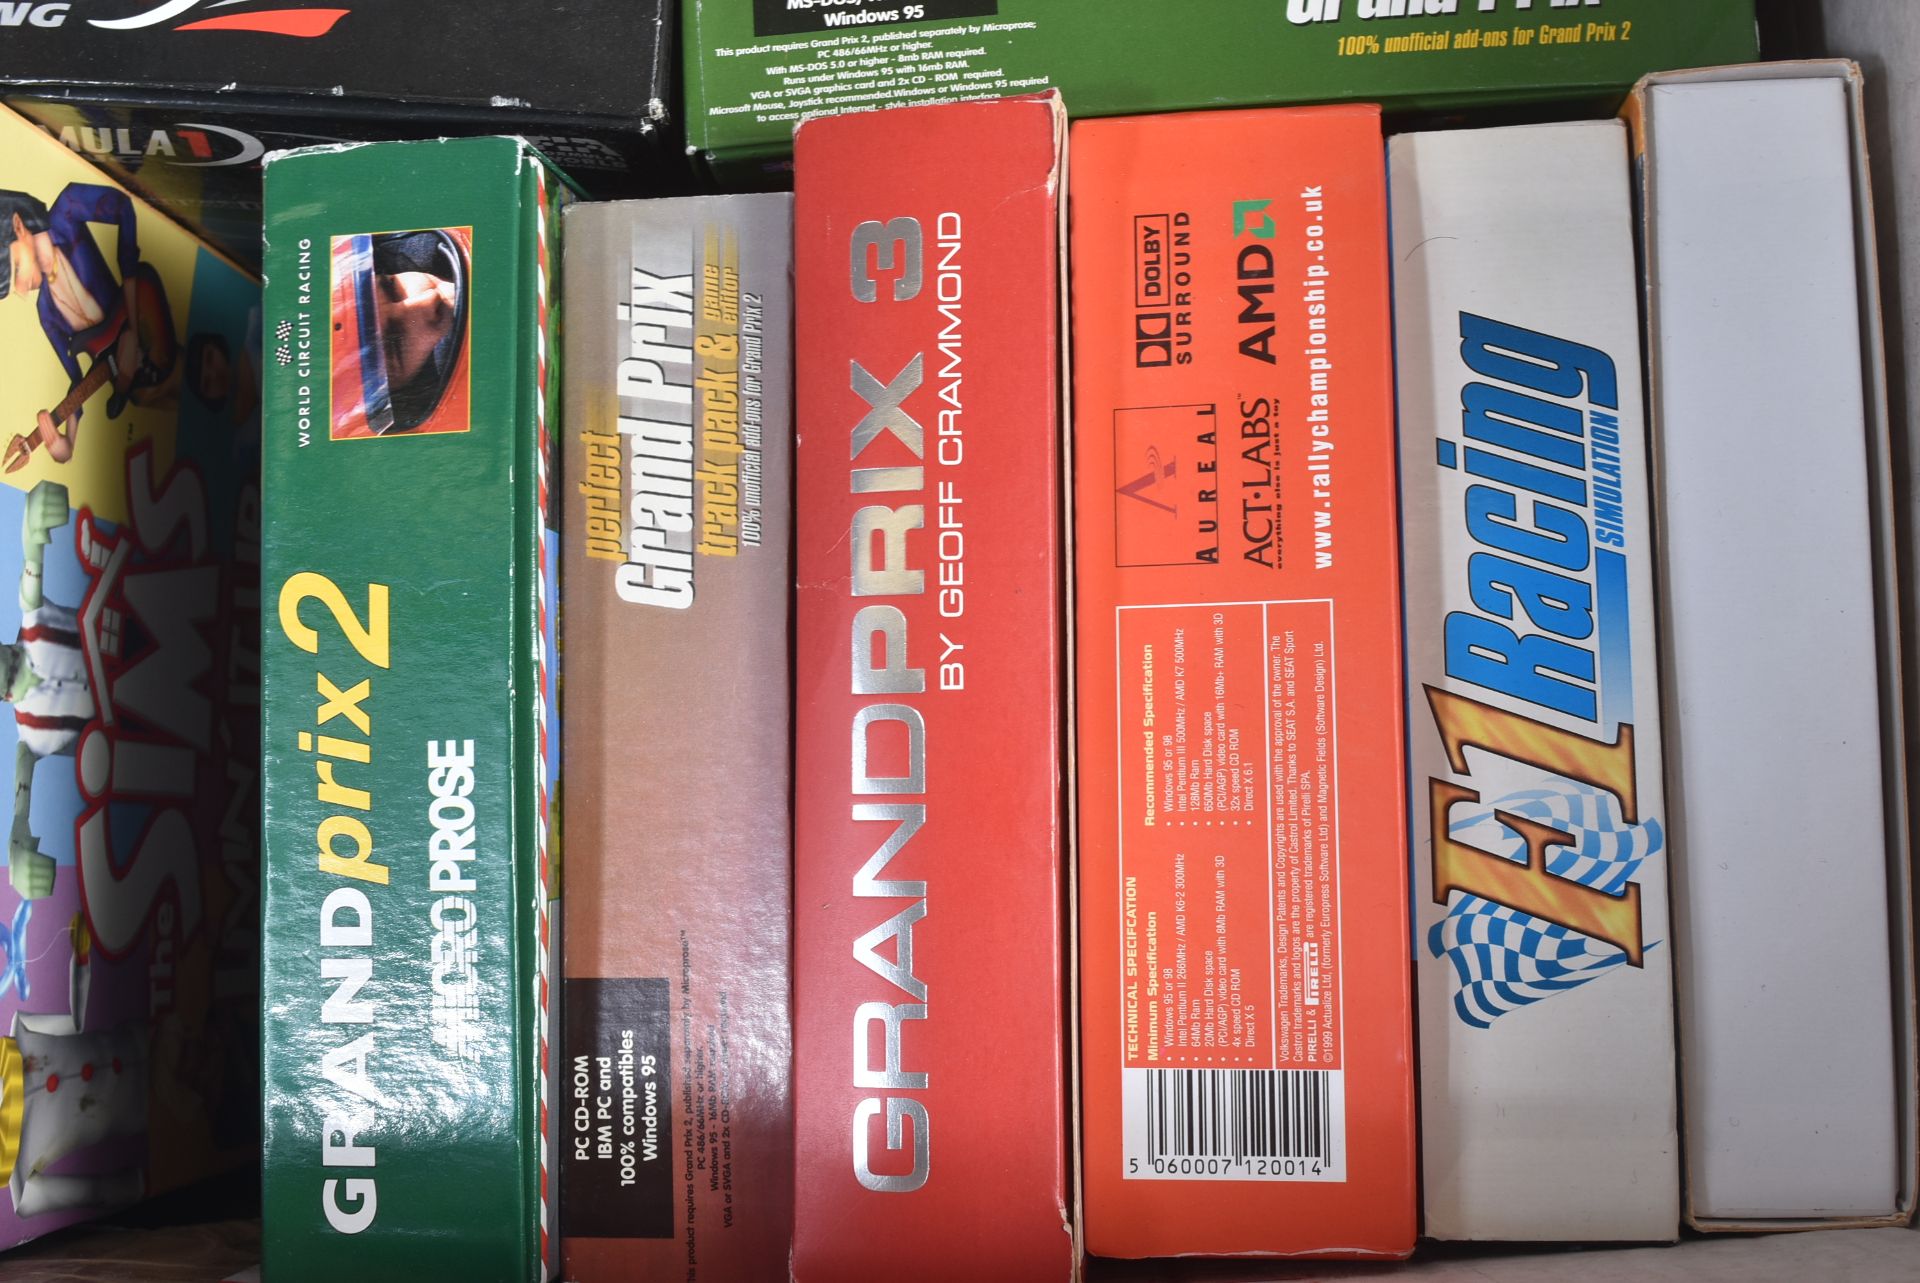 RETRO GAMING - LARGE COLLECTION OF BIG BOX PC CD ROM VIDEO GAMES - Image 7 of 7